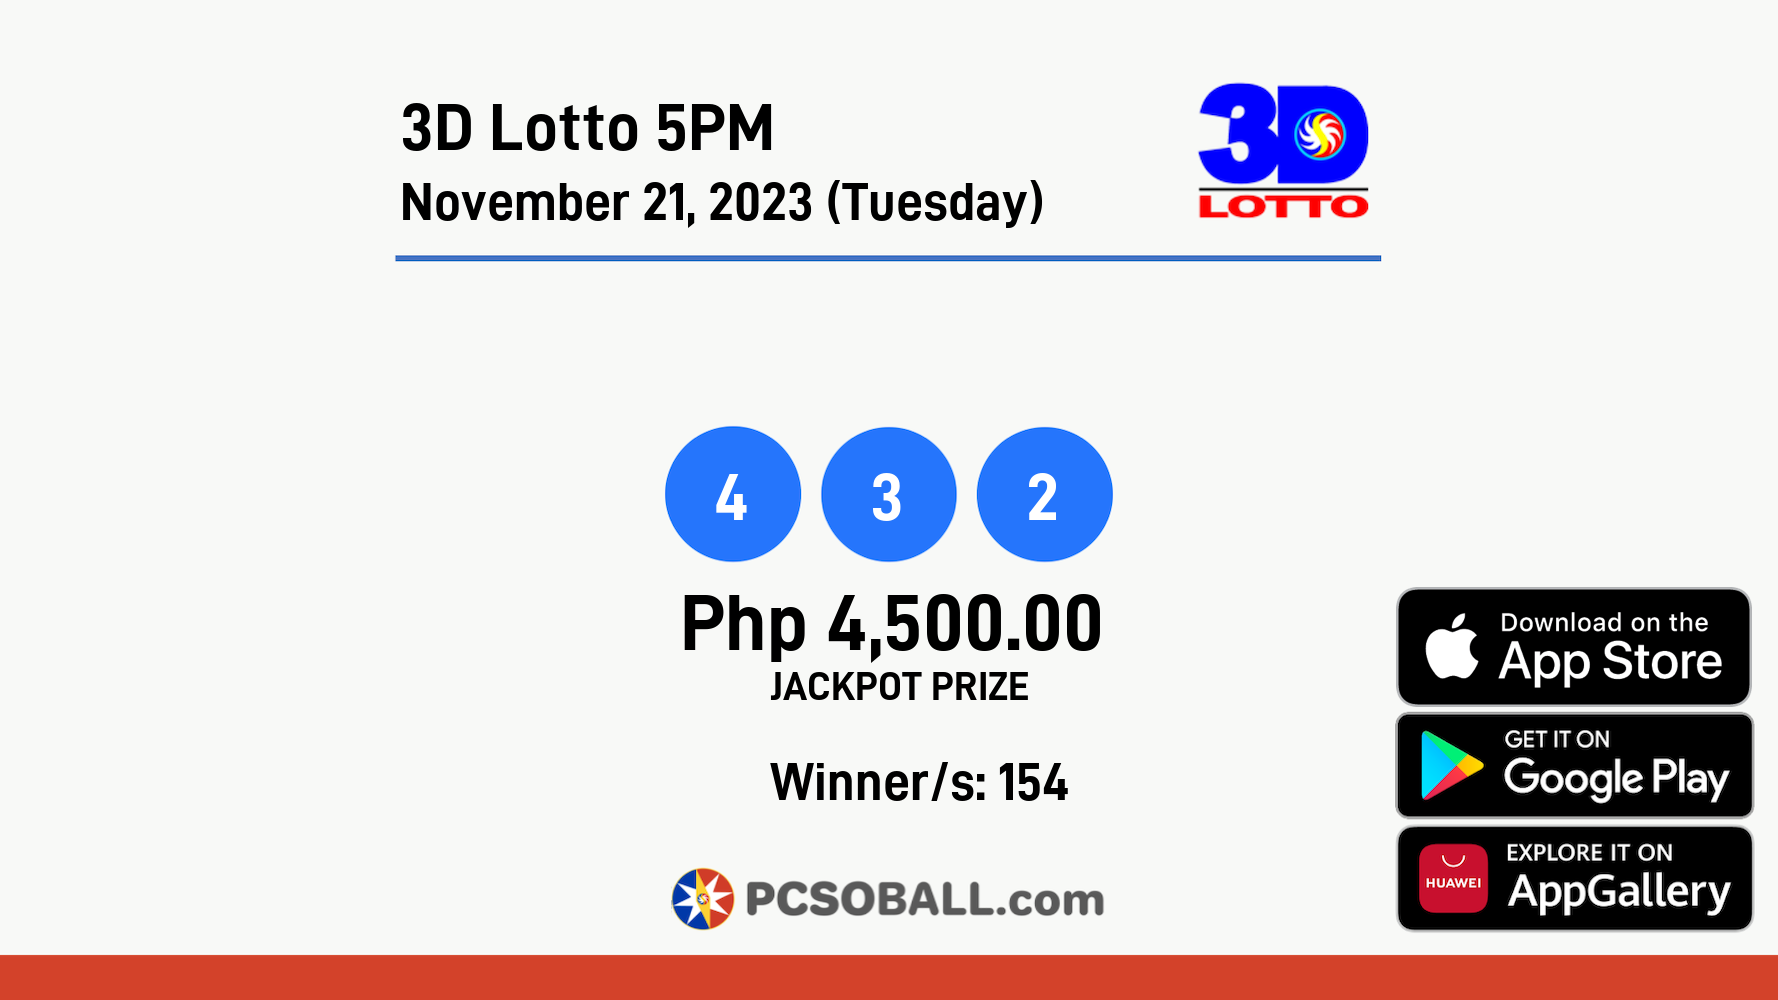 3D Lotto 5PM November 21, 2023 (Tuesday) Result